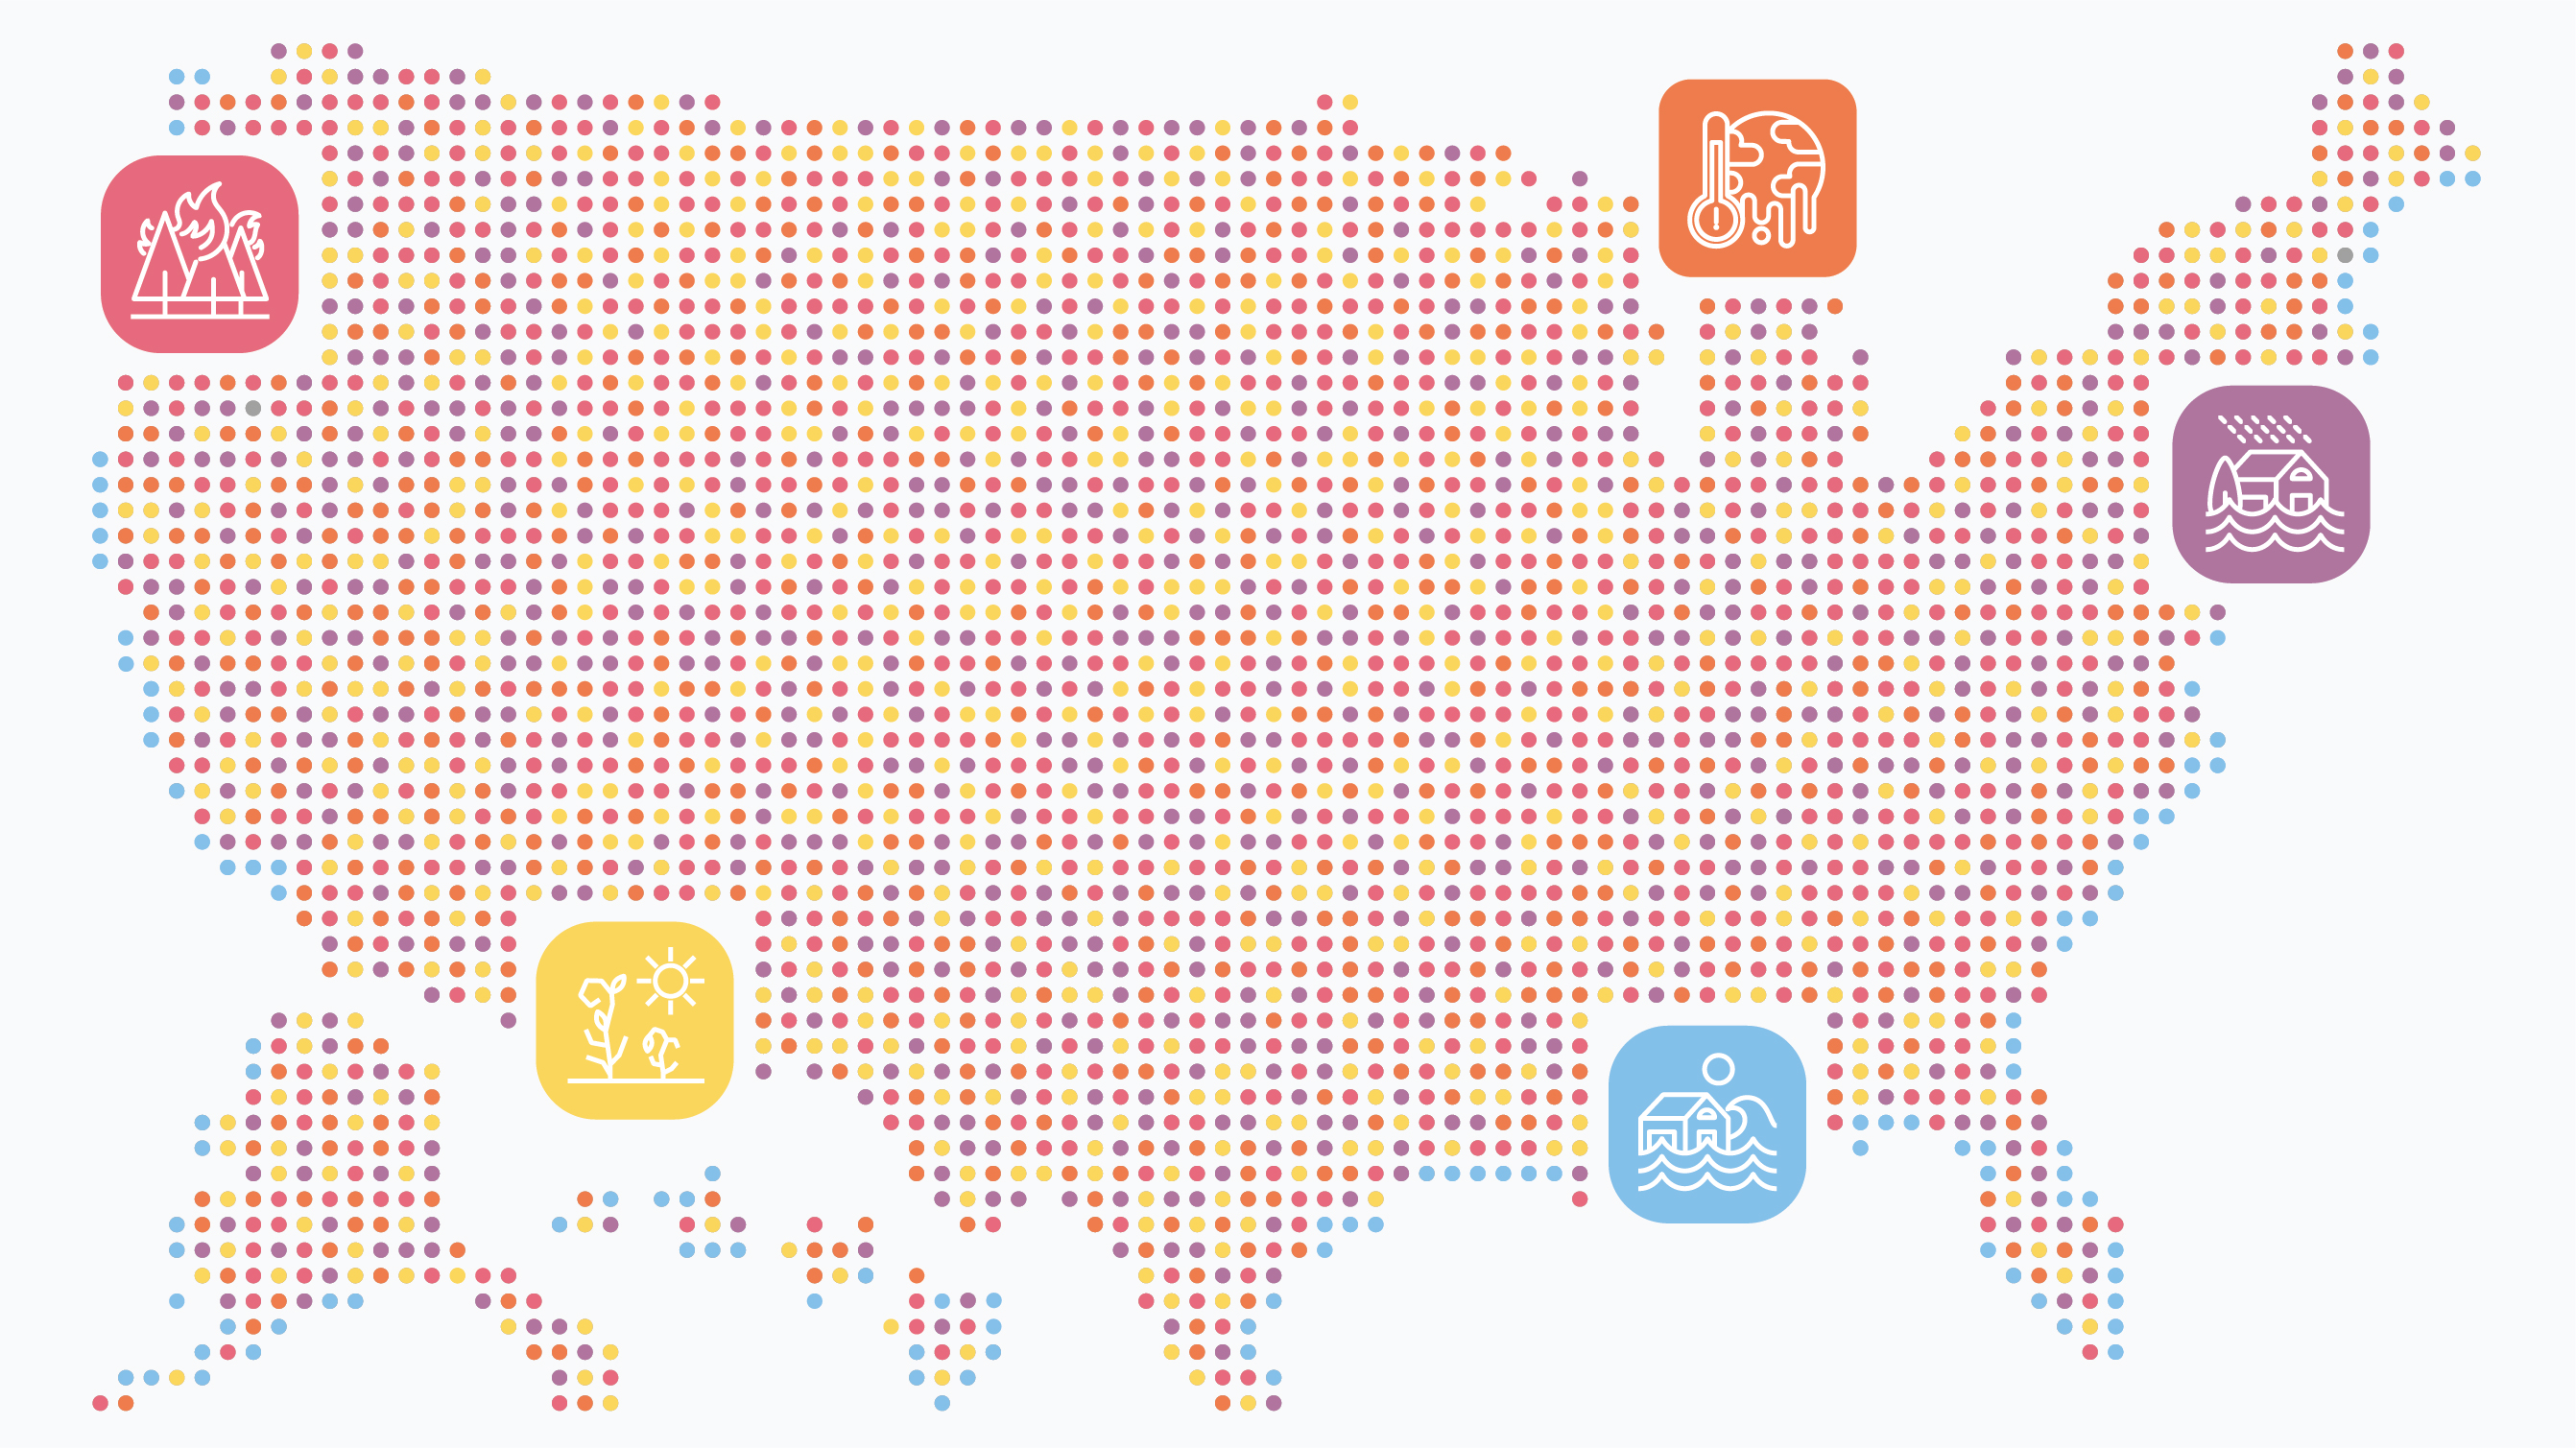 A graphic of the United States formed of a grid of multicolored dots overlaid with icons representing flood, wildfire, and extreme weather